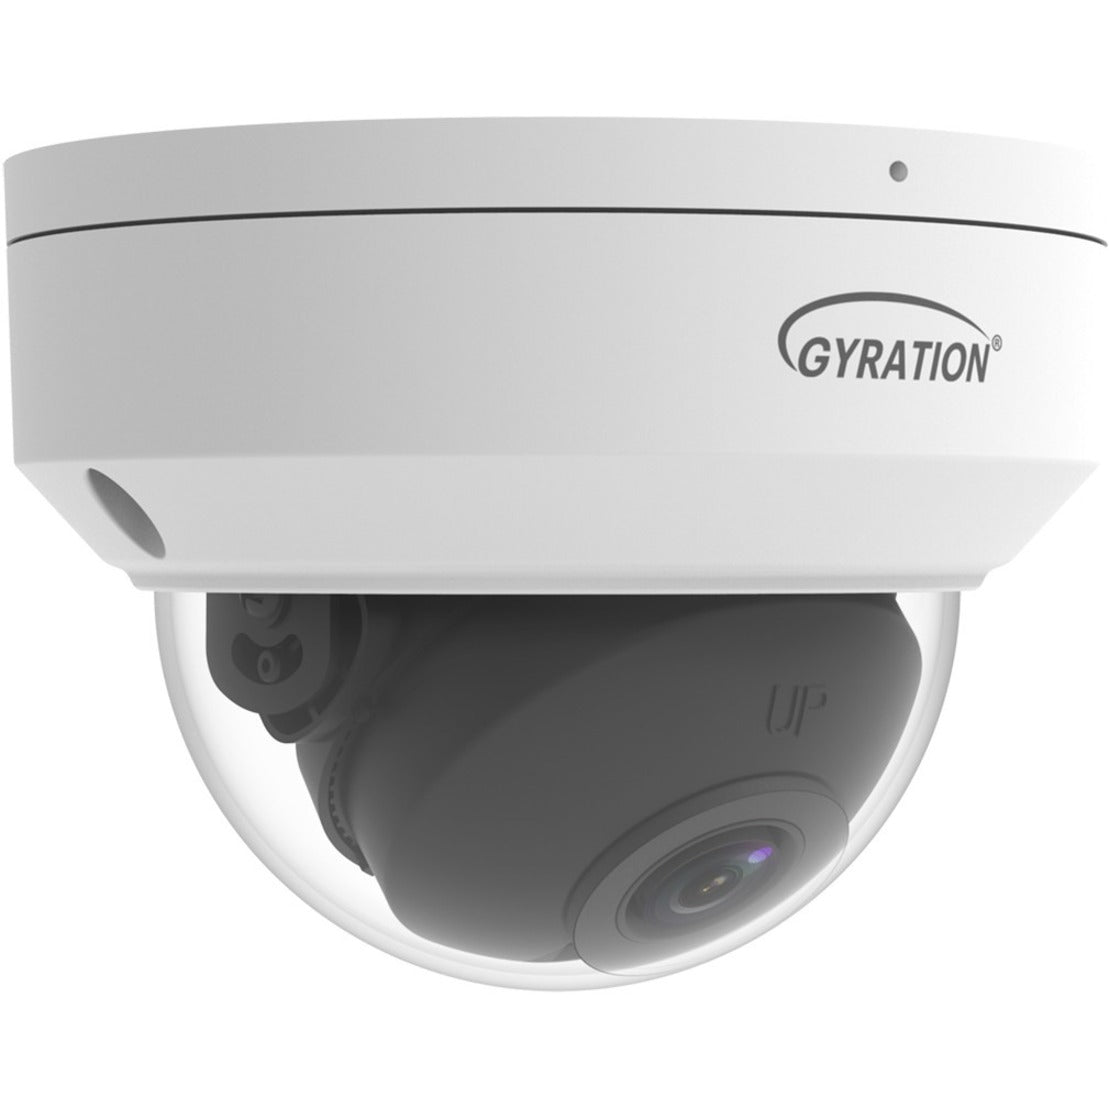 Gyration CYBERVIEW 810D 8 MP Outdoor Intelligent Fixed Dome Camera, Ultra HD Video, Night Vision, Wide Dynamic Range, SD Card Storage